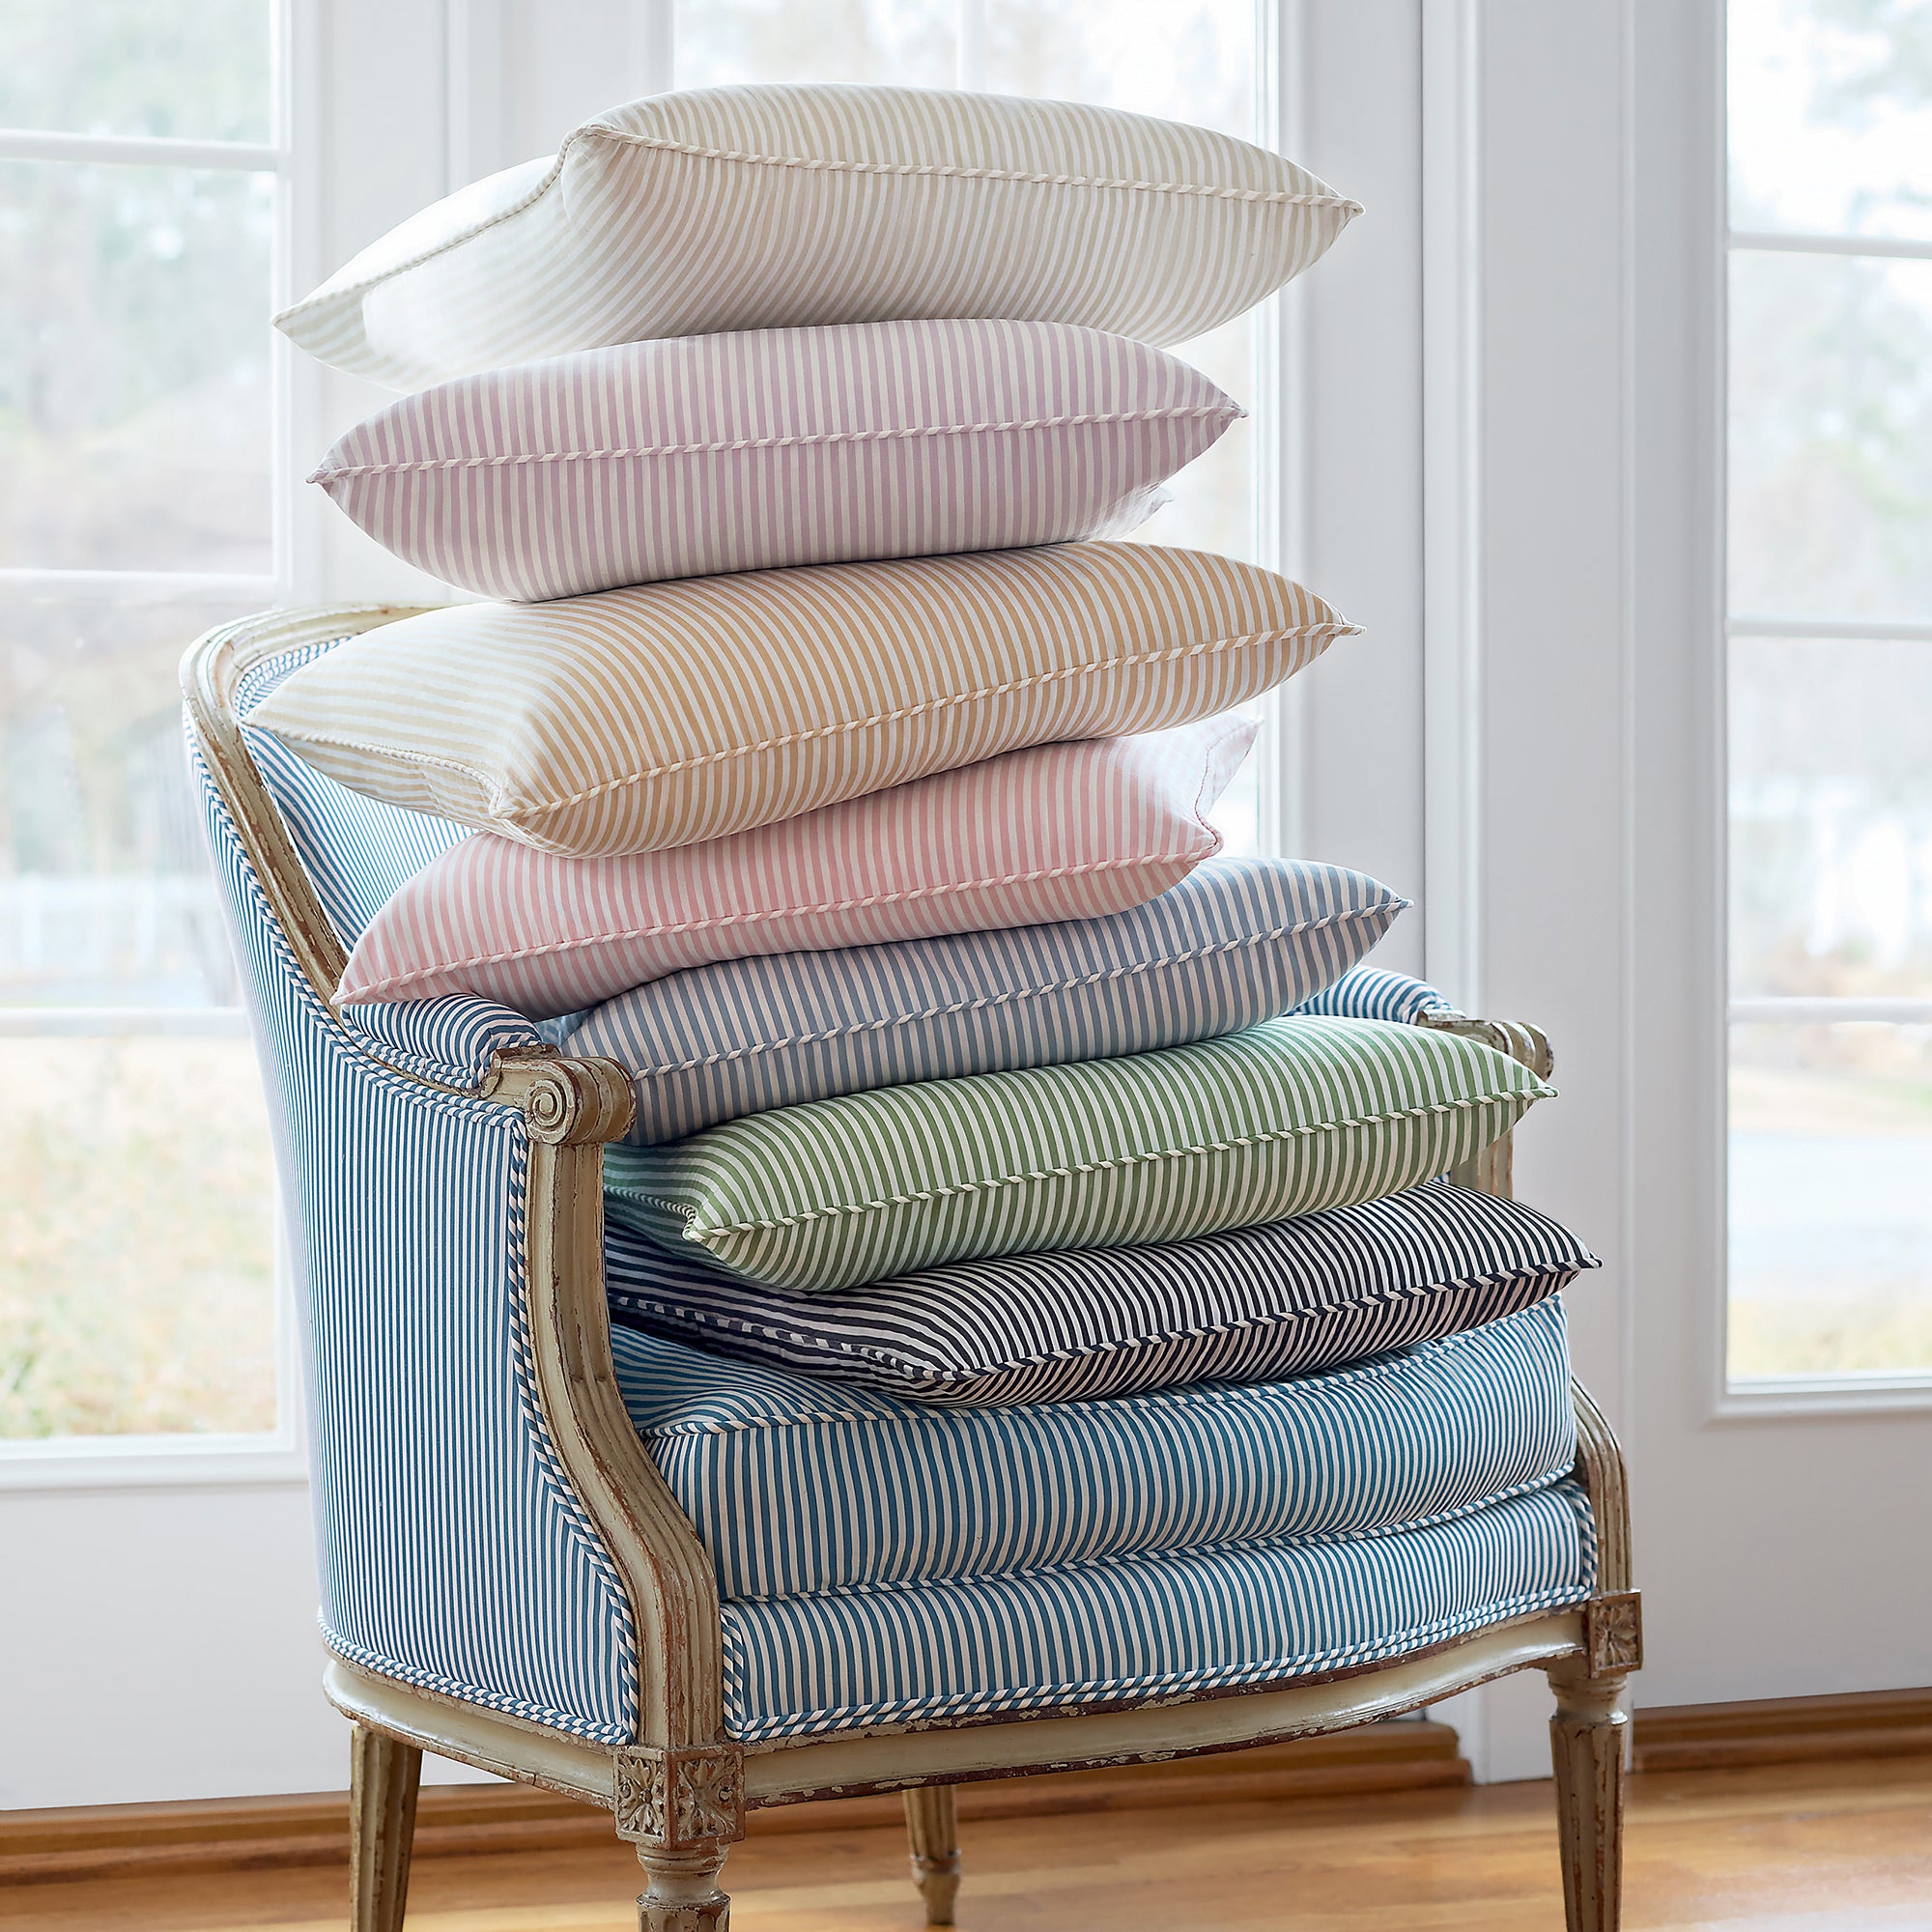 Collection of chair and pillow fabrics in Holden Stripe woven fabric featuring blue color fabric - pattern number AW57804 - by Anna French in the Bristol collection